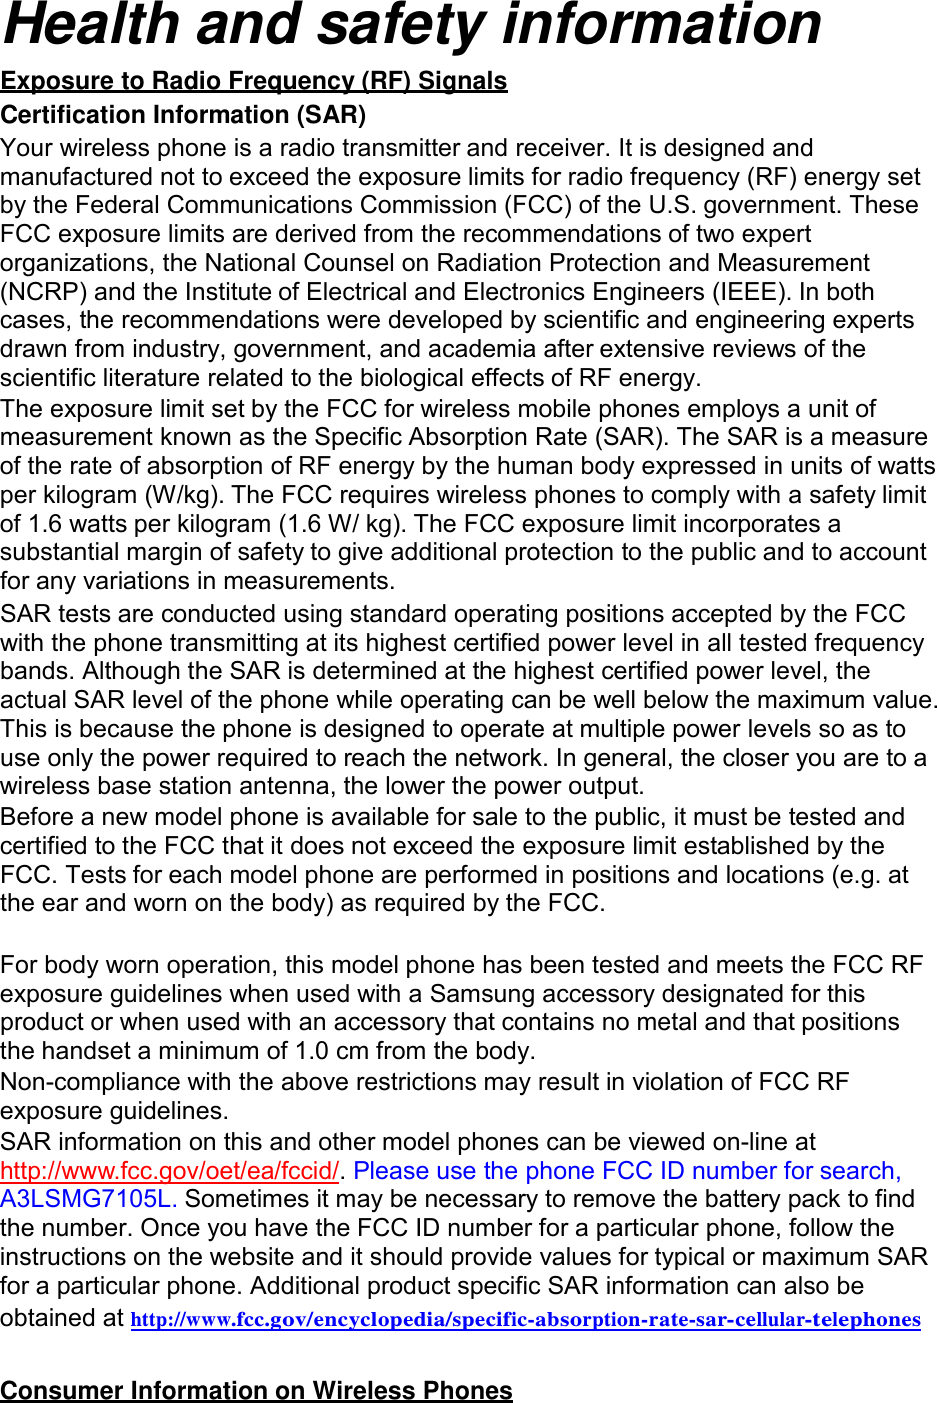  Health and safety information Exposure to Radio Frequency (RF) Signals Certification Information (SAR) Your wireless phone is a radio transmitter and receiver. It is designed and manufactured not to exceed the exposure limits for radio frequency (RF) energy set by the Federal Communications Commission (FCC) of the U.S. government. These FCC exposure limits are derived from the recommendations of two expert organizations, the National Counsel on Radiation Protection and Measurement (NCRP) and the Institute of Electrical and Electronics Engineers (IEEE). In both cases, the recommendations were developed by scientific and engineering experts drawn from industry, government, and academia after extensive reviews of the scientific literature related to the biological effects of RF energy. The exposure limit set by the FCC for wireless mobile phones employs a unit of measurement known as the Specific Absorption Rate (SAR). The SAR is a measure of the rate of absorption of RF energy by the human body expressed in units of watts per kilogram (W/kg). The FCC requires wireless phones to comply with a safety limit of 1.6 watts per kilogram (1.6 W/ kg). The FCC exposure limit incorporates a substantial margin of safety to give additional protection to the public and to account for any variations in measurements. SAR tests are conducted using standard operating positions accepted by the FCC with the phone transmitting at its highest certified power level in all tested frequency bands. Although the SAR is determined at the highest certified power level, the actual SAR level of the phone while operating can be well below the maximum value. This is because the phone is designed to operate at multiple power levels so as to use only the power required to reach the network. In general, the closer you are to a wireless base station antenna, the lower the power output. Before a new model phone is available for sale to the public, it must be tested and certified to the FCC that it does not exceed the exposure limit established by the FCC. Tests for each model phone are performed in positions and locations (e.g. at the ear and worn on the body) as required by the FCC.   For body worn operation, this model phone has been tested and meets the FCC RF exposure guidelines when used with a Samsung accessory designated for this product or when used with an accessory that contains no metal and that positions the handset a minimum of 1.0 cm from the body. Non-compliance with the above restrictions may result in violation of FCC RF exposure guidelines. SAR information on this and other model phones can be viewed on-line at http://www.fcc.gov/oet/ea/fccid/. Please use the phone FCC ID number for search, A3LSMG7105L. Sometimes it may be necessary to remove the battery pack to find the number. Once you have the FCC ID number for a particular phone, follow the instructions on the website and it should provide values for typical or maximum SAR for a particular phone. Additional product specific SAR information can also be obtained at  http://www.fcc.gov/encyclopedia/specific-absorption-rate-sar-cellular-telephones   Consumer Information on Wireless Phones 